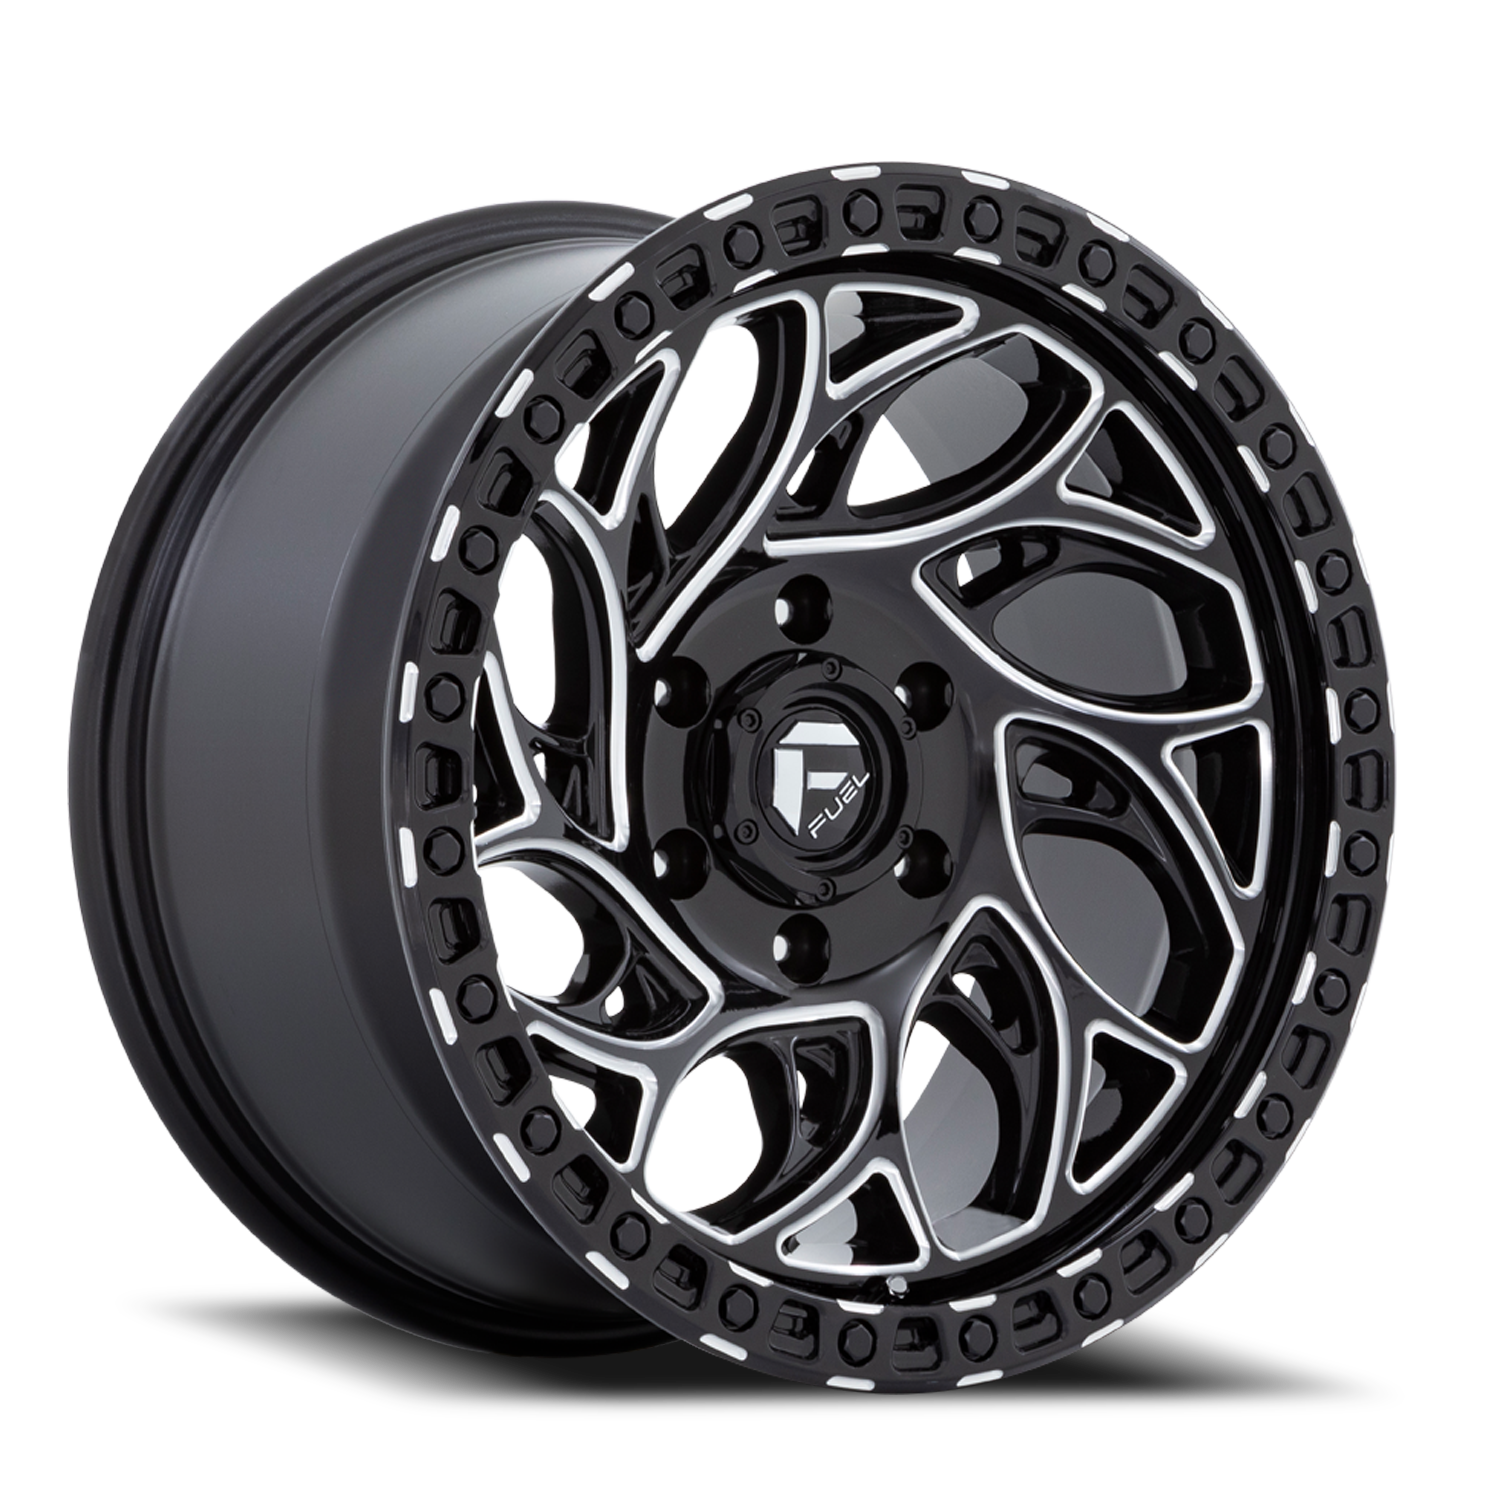 Aluminum Wheels 18X9 Runner OR D840 6 On 139.7 Gloss Black Milled 106.1 Bore 1 Offset Fuel Off Road Wheels